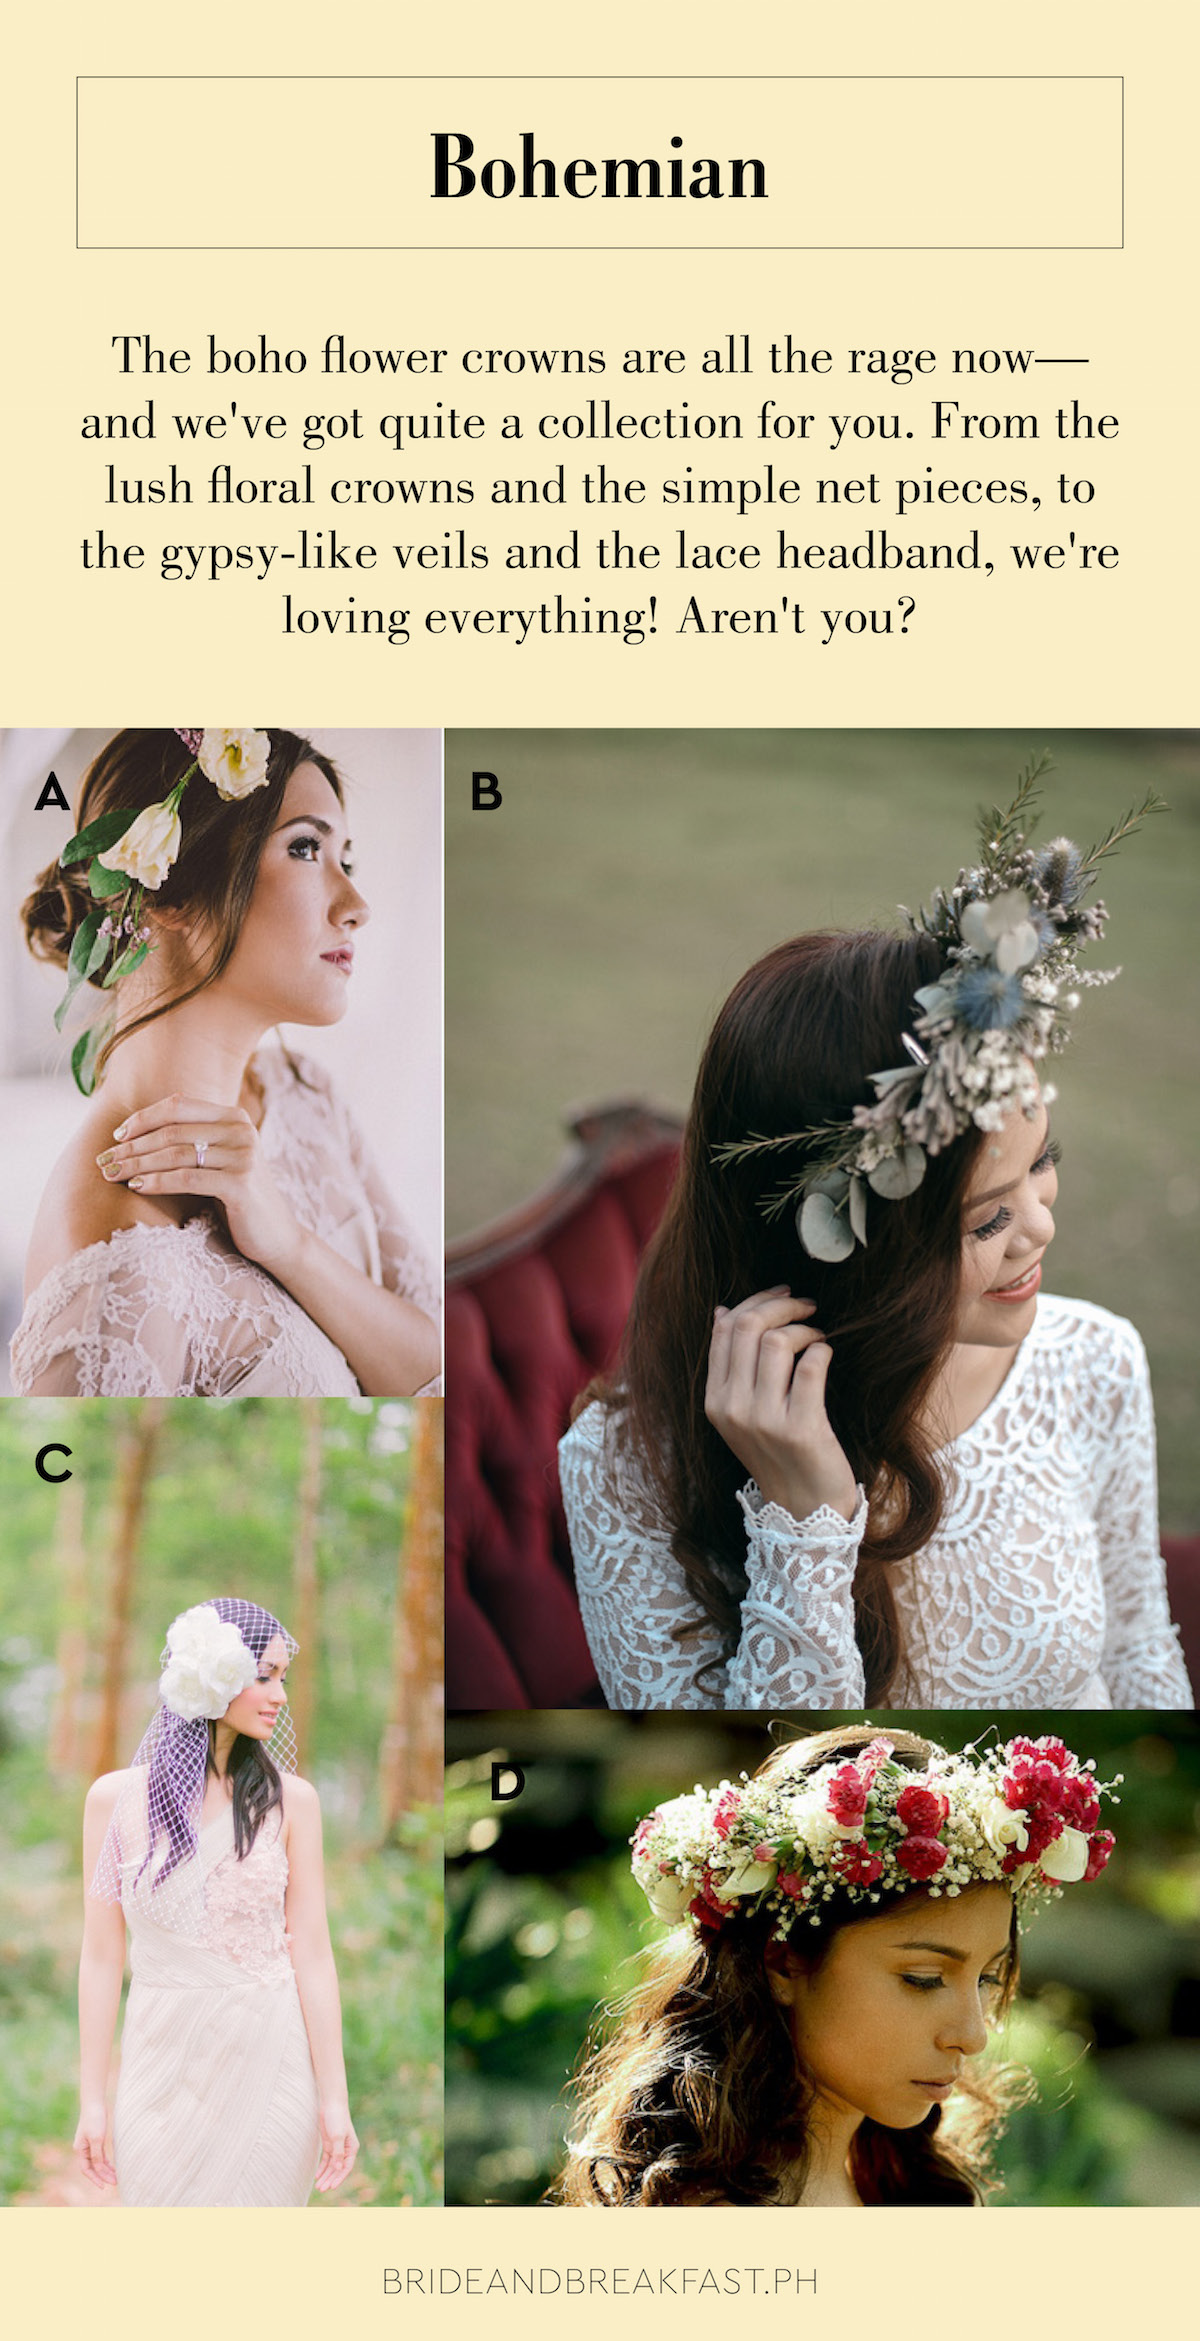 Bohemian The boho flower crowns are all the rage now--and we've got quite a collection for you. From the lush floral crowns and the simple net pieces, to the gypsy-like veils and the lace headband, we're loving everything! Aren't you?